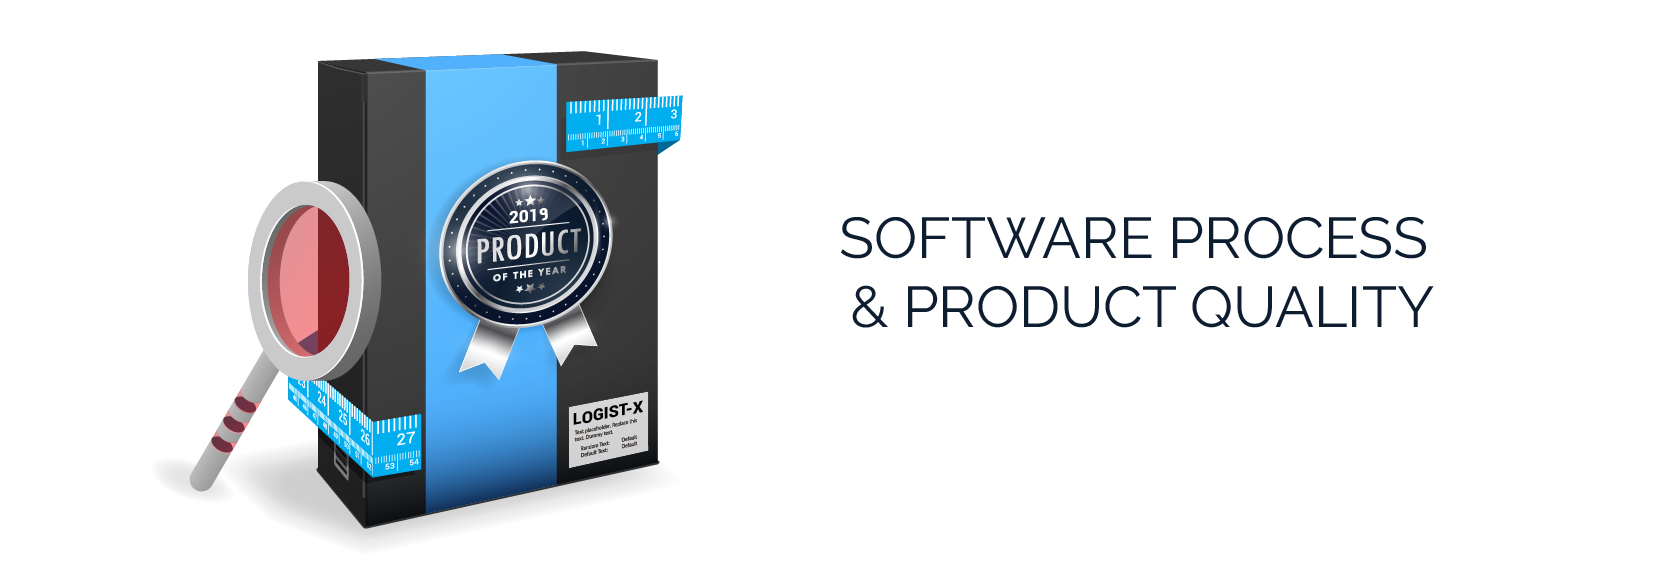 Software Process & Product Quality